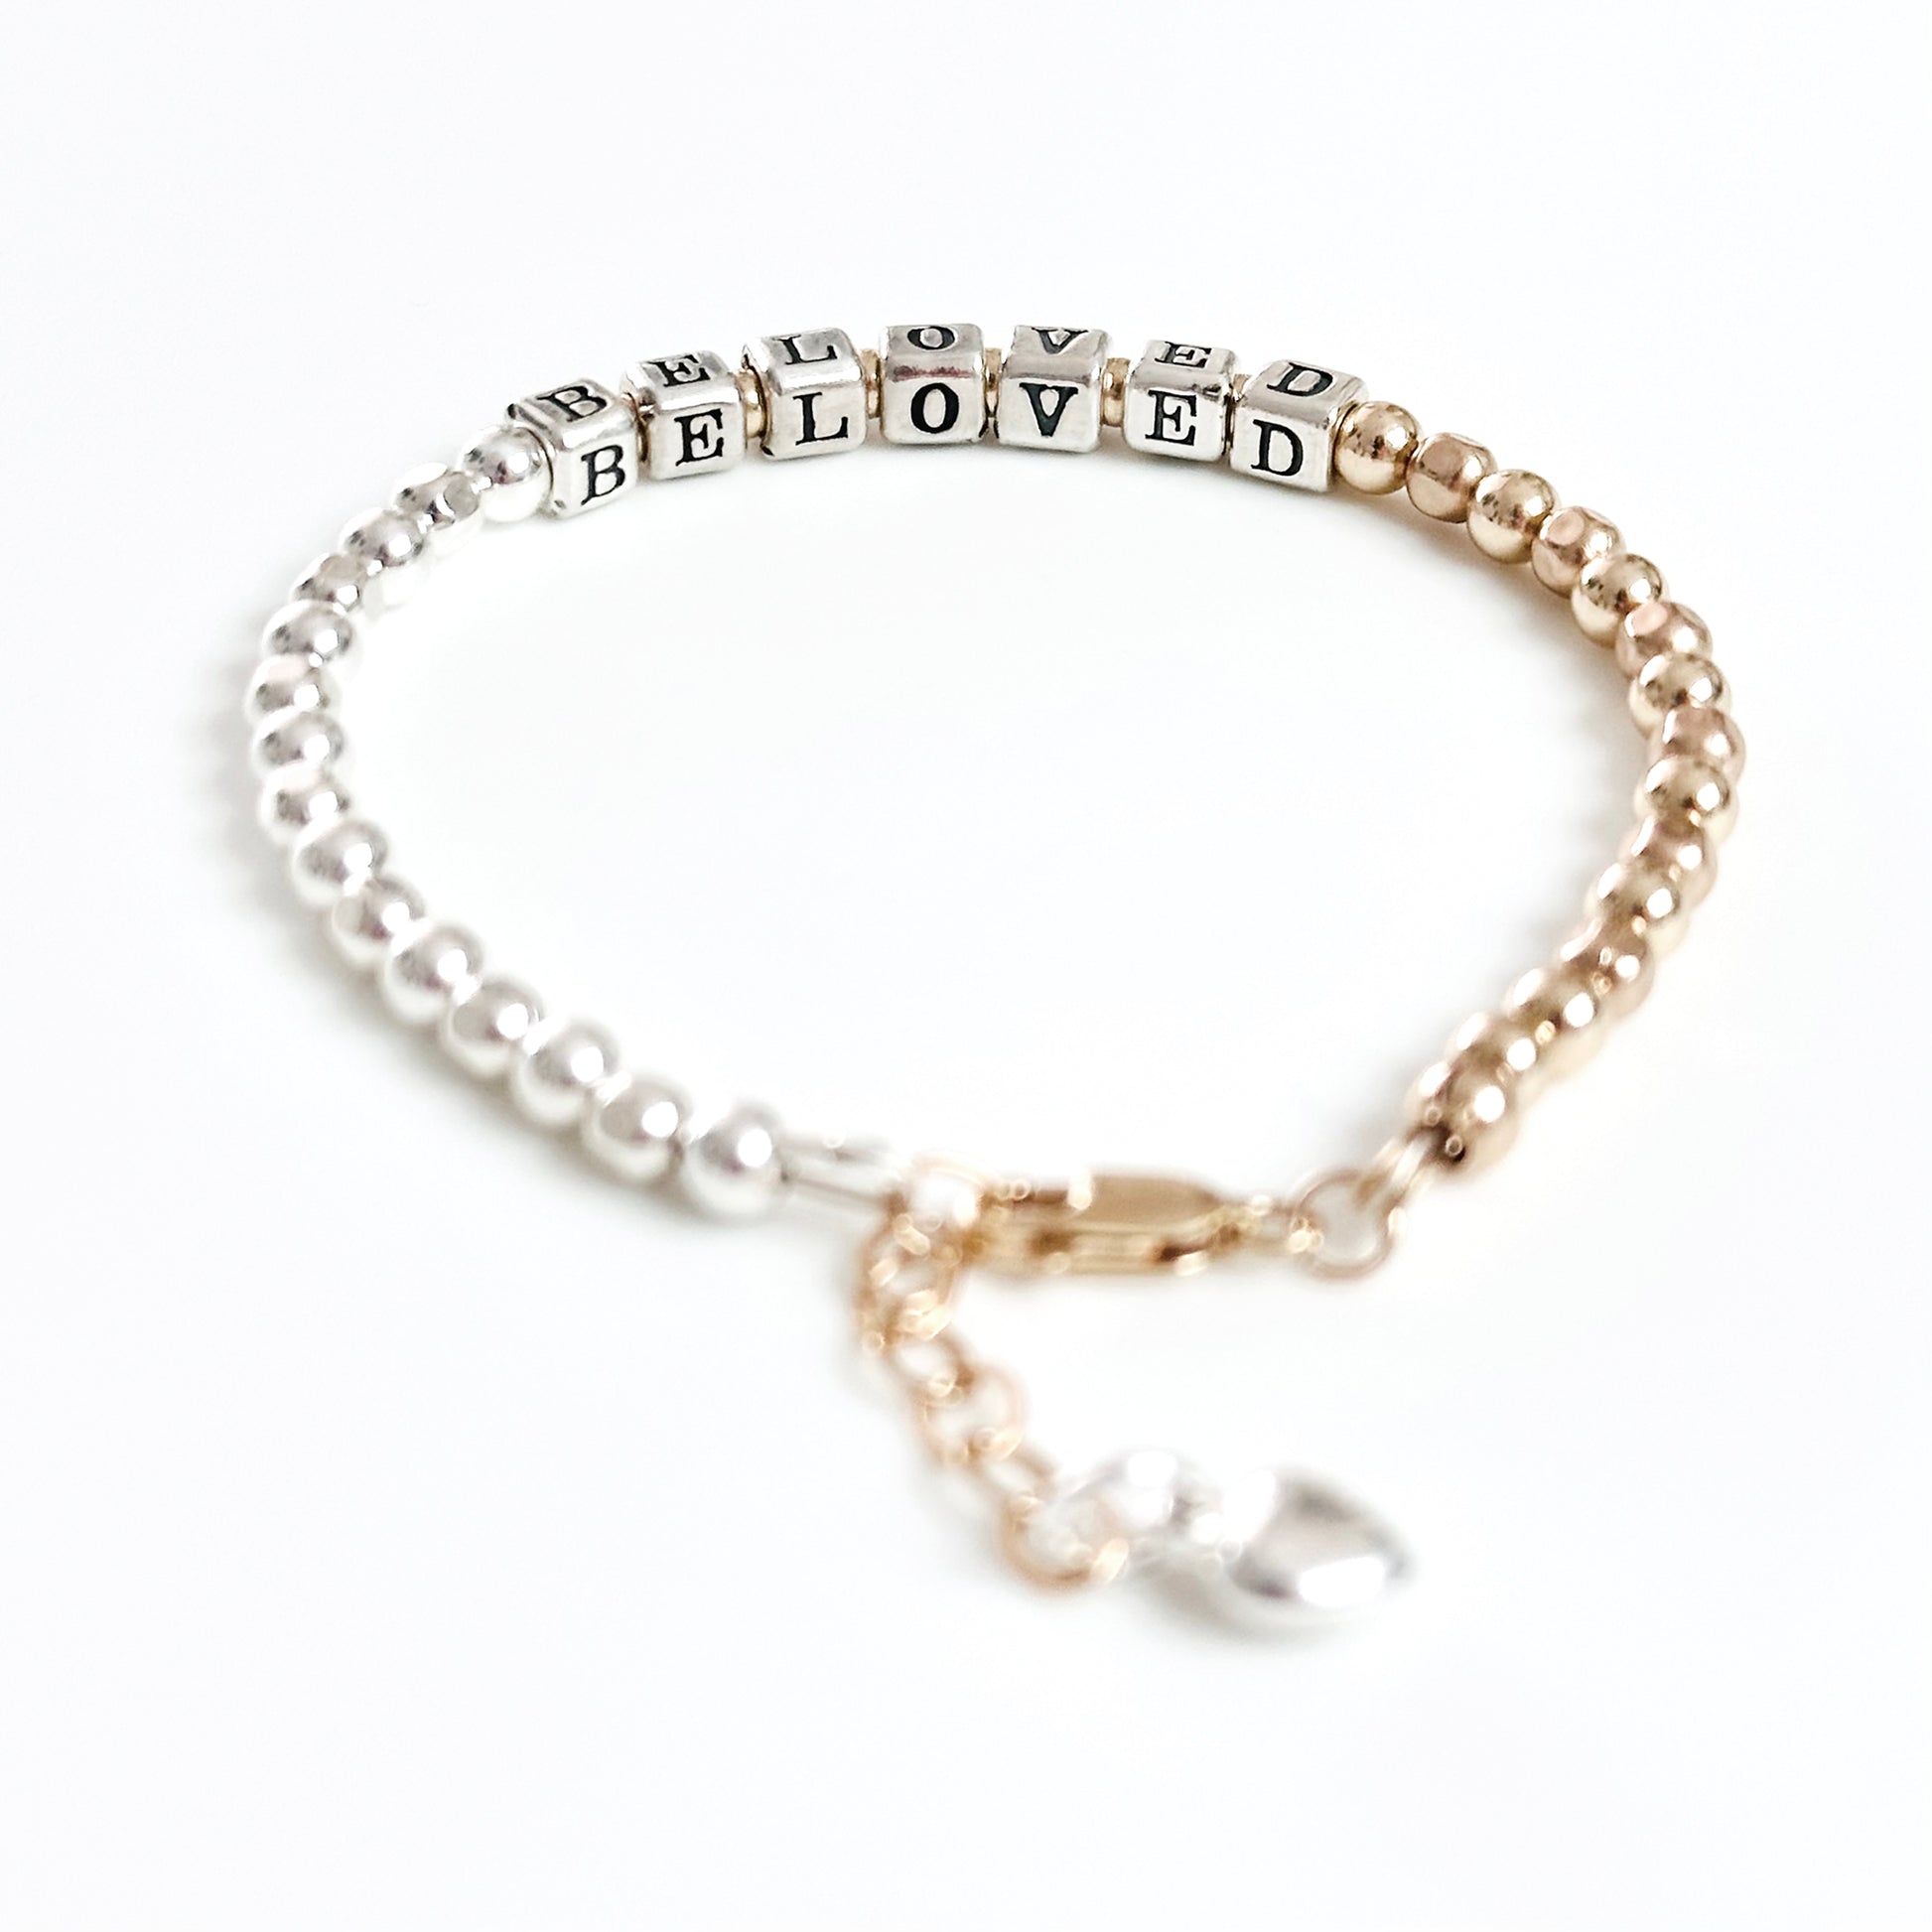 Beloved Mother's Day Bracelet in sterling silver and 14K gold beads and heart charm